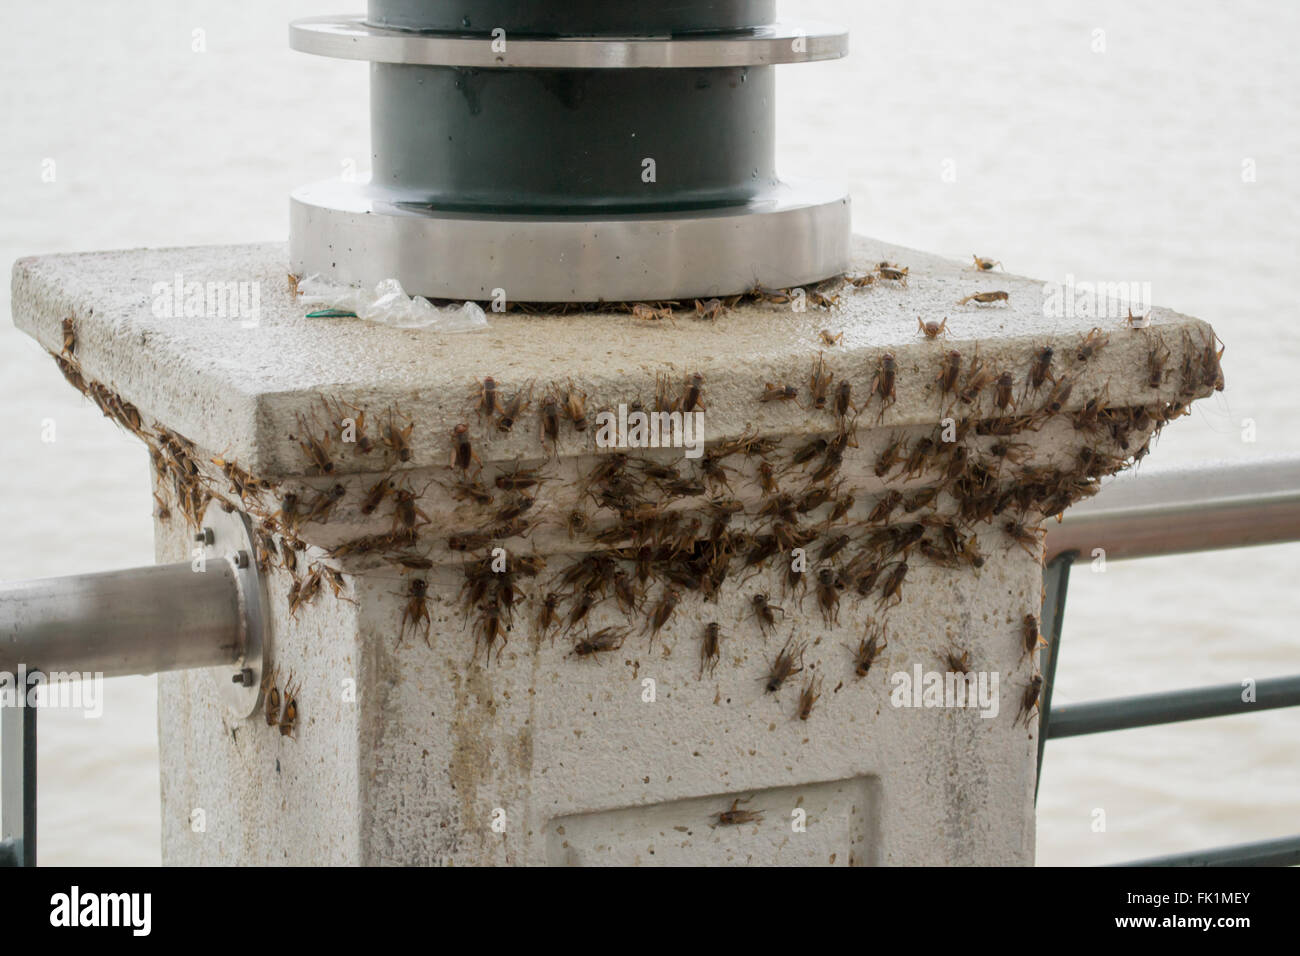 A huge load of crickets (acheta domesticus) swarming the seafront pillar in Guayaquil, Ecuador Stock Photo